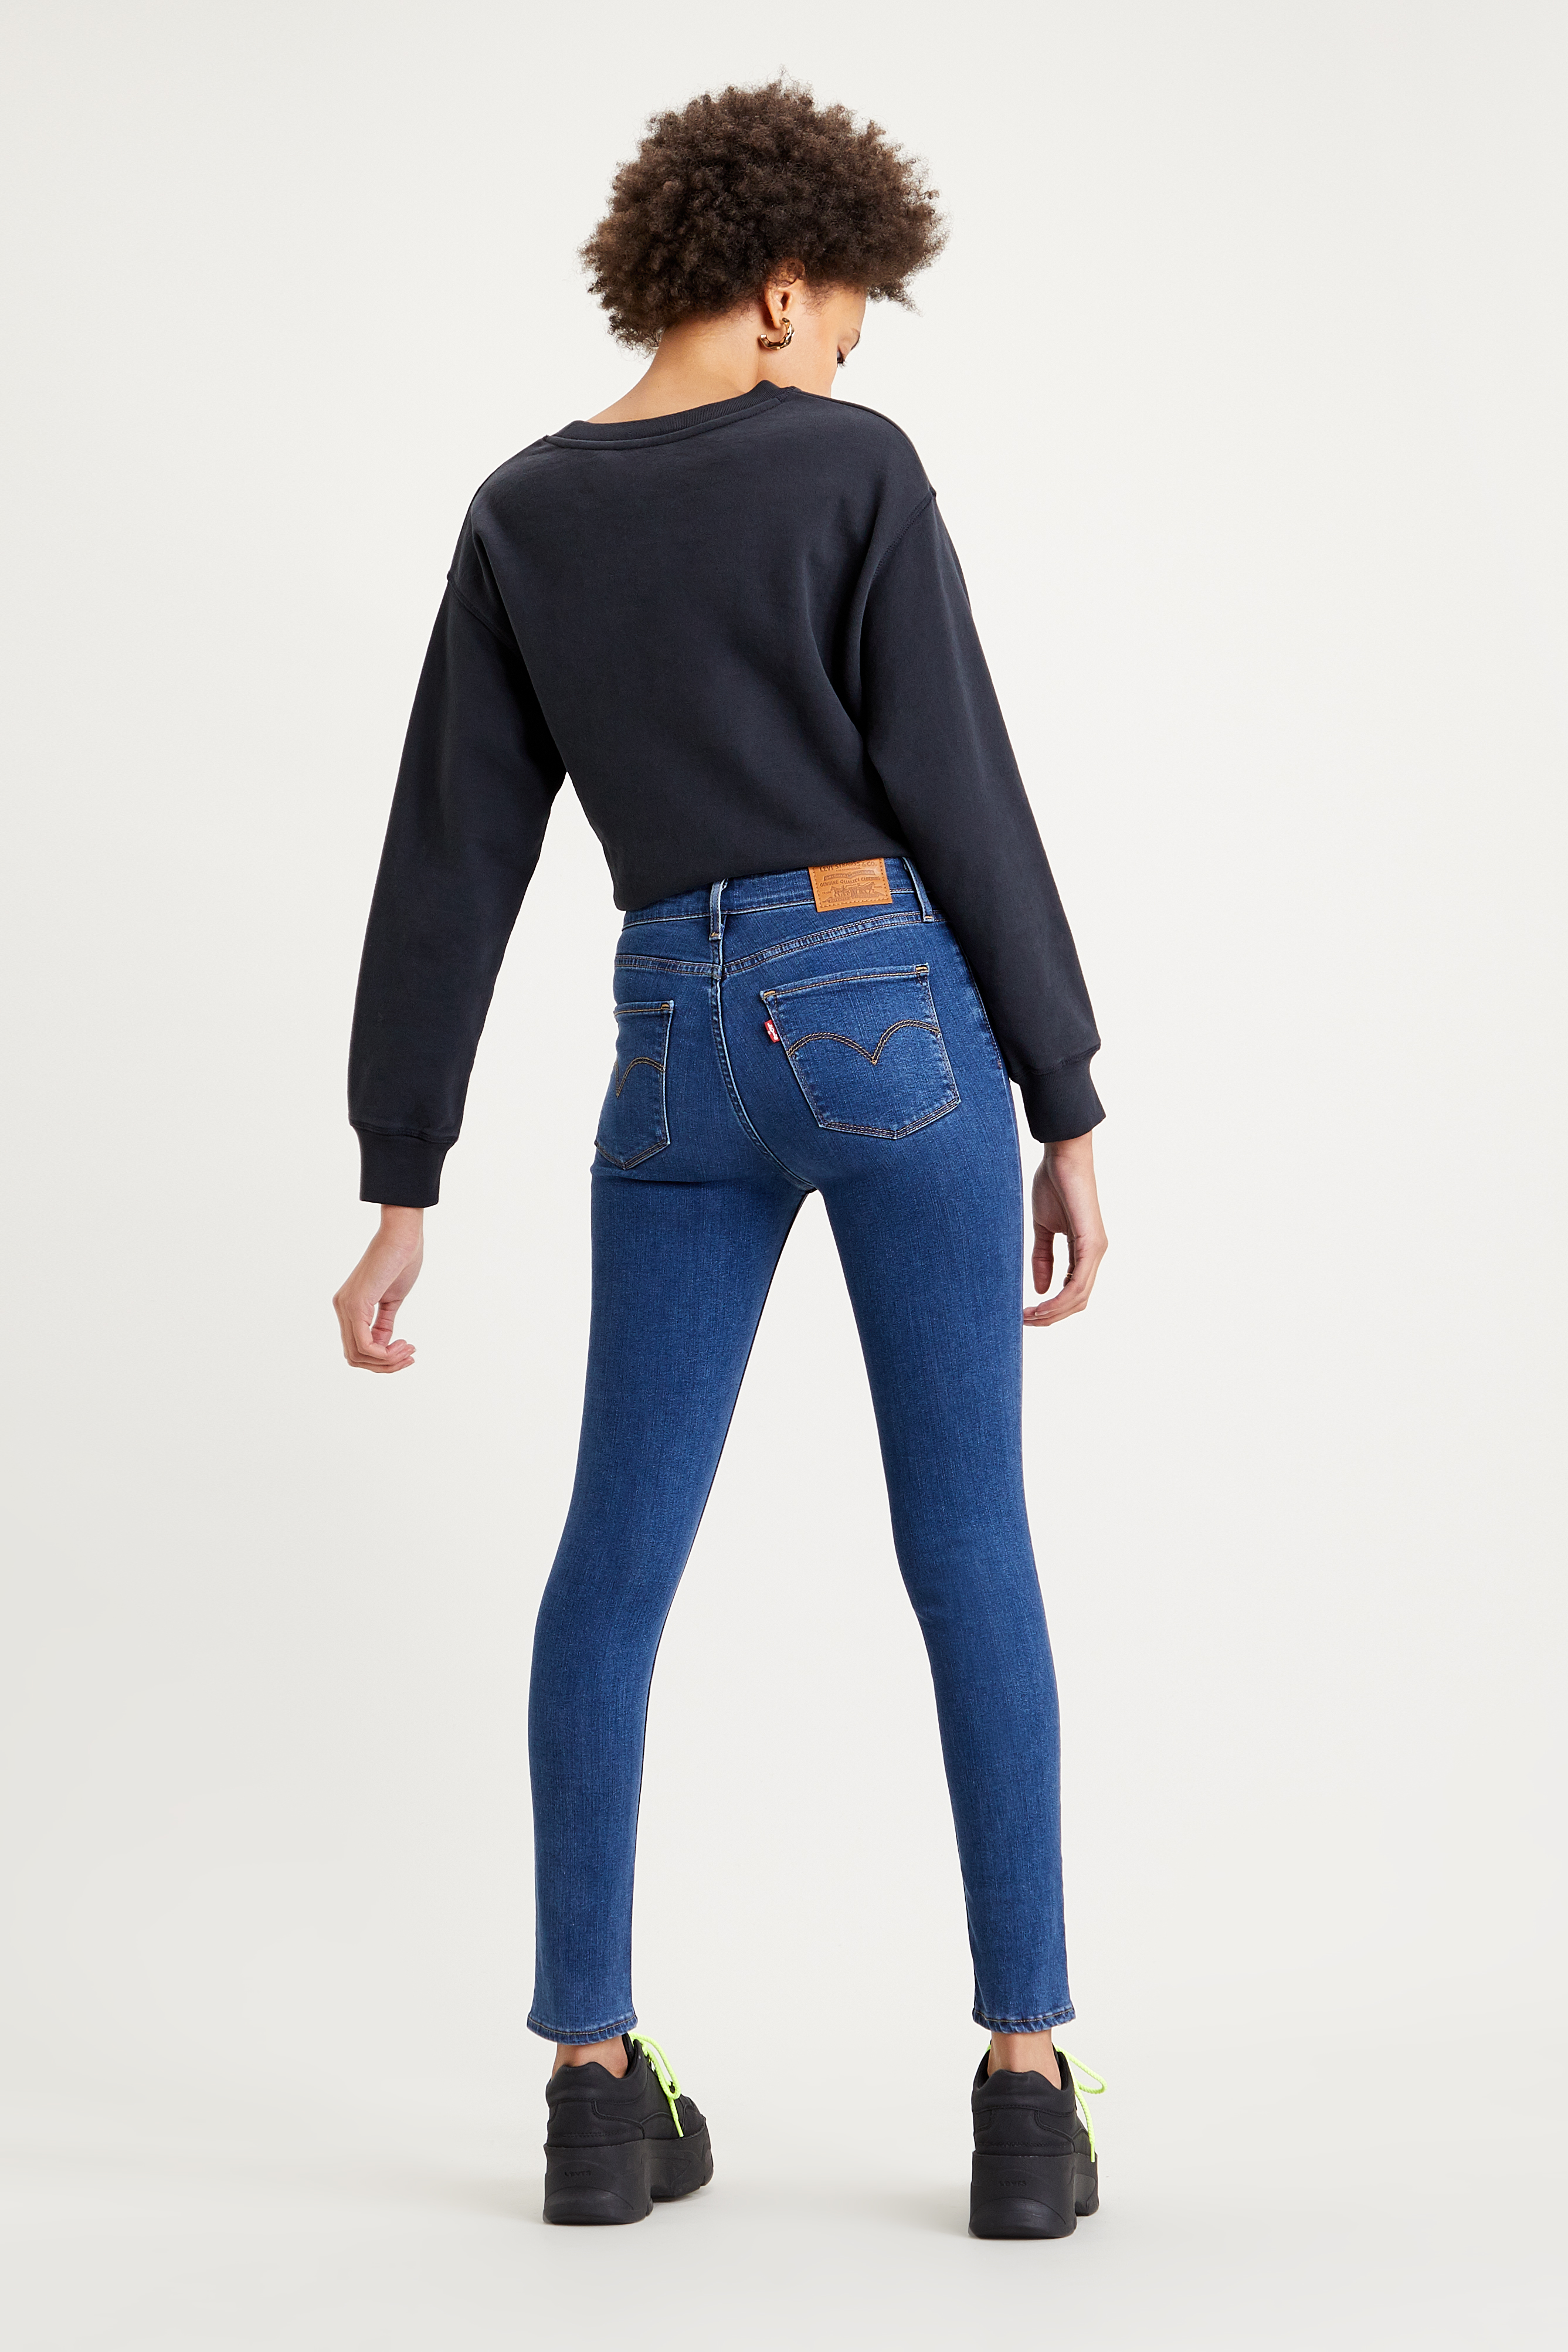 VAQUERO MUJER LEVIS HIGH WAISTED MOM JEAN FIT THE - Korner